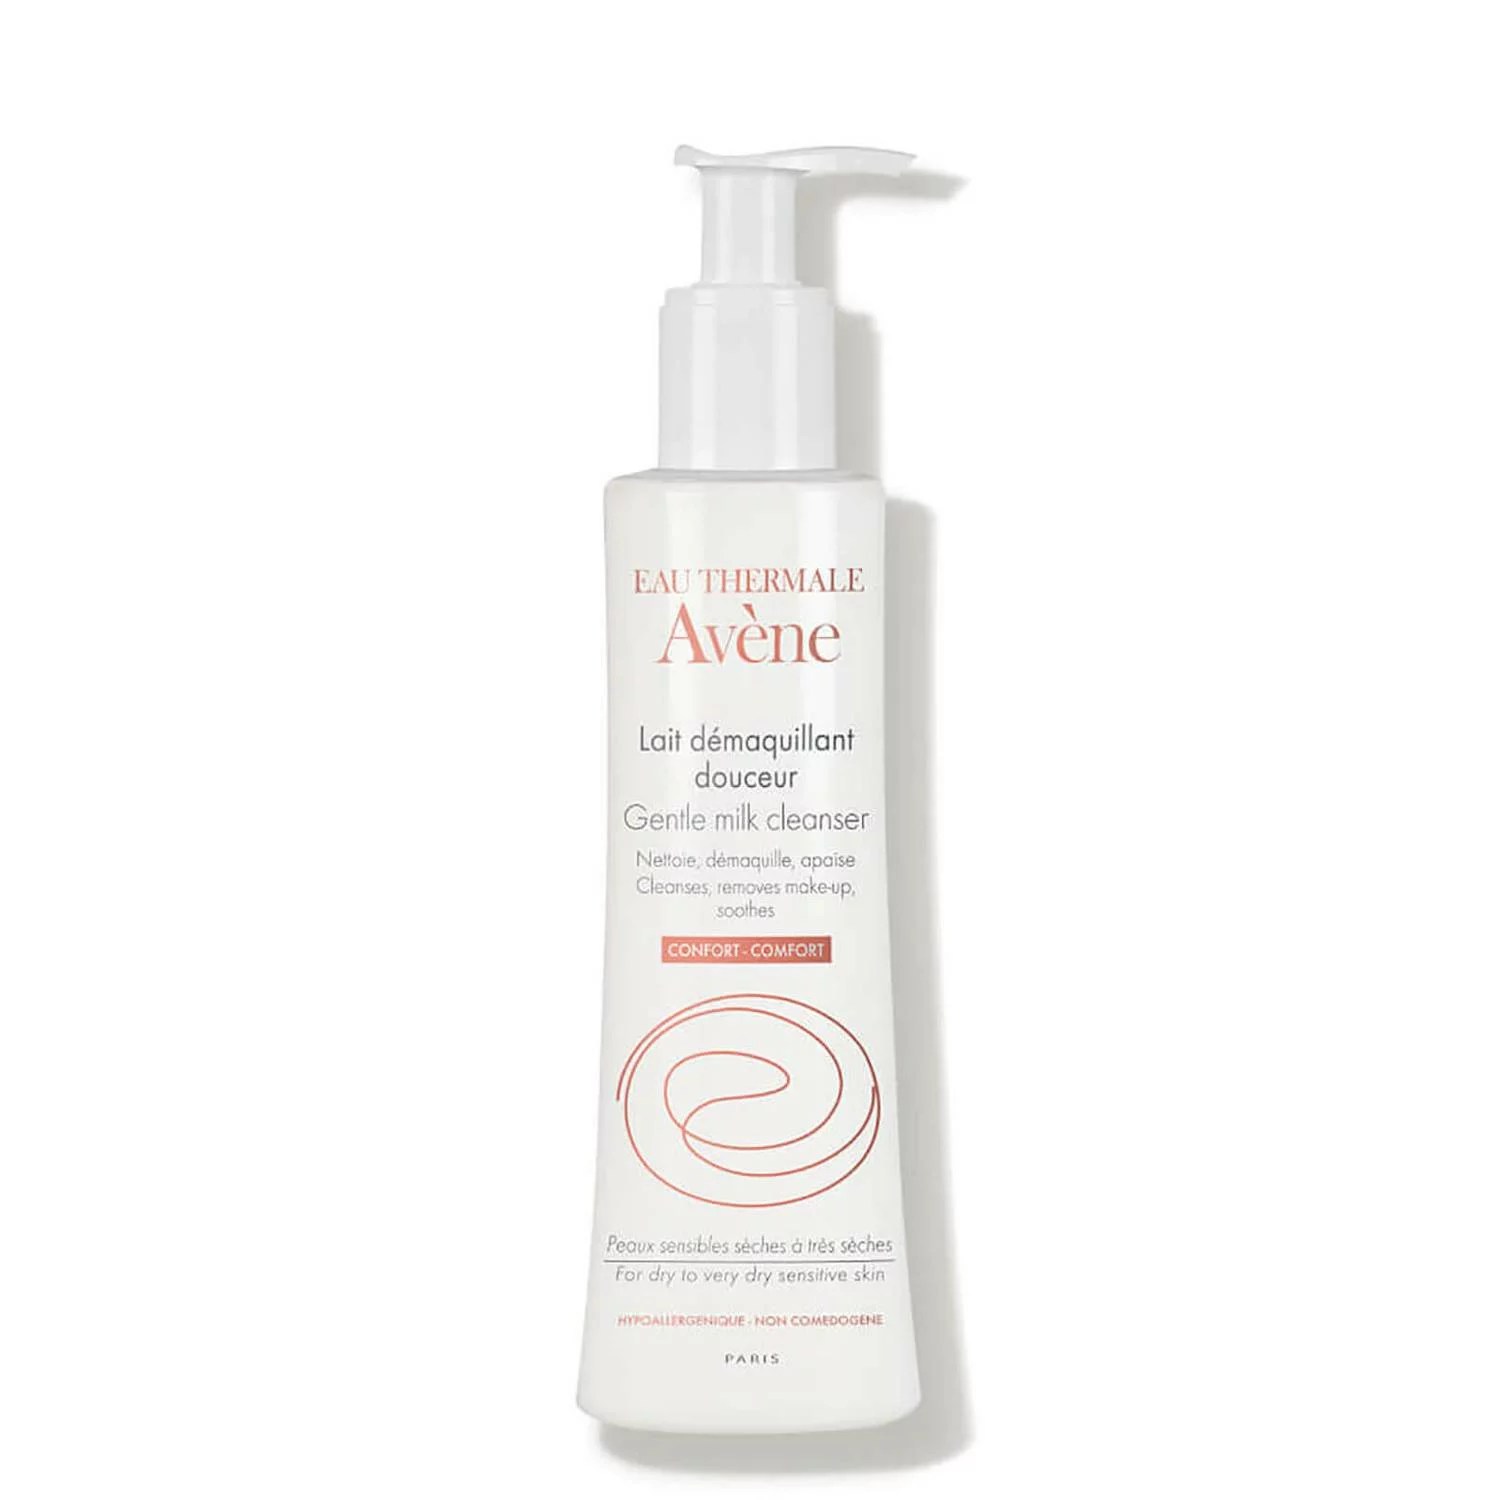 Avène Gentle Milk Cleanser, dry skin facial products